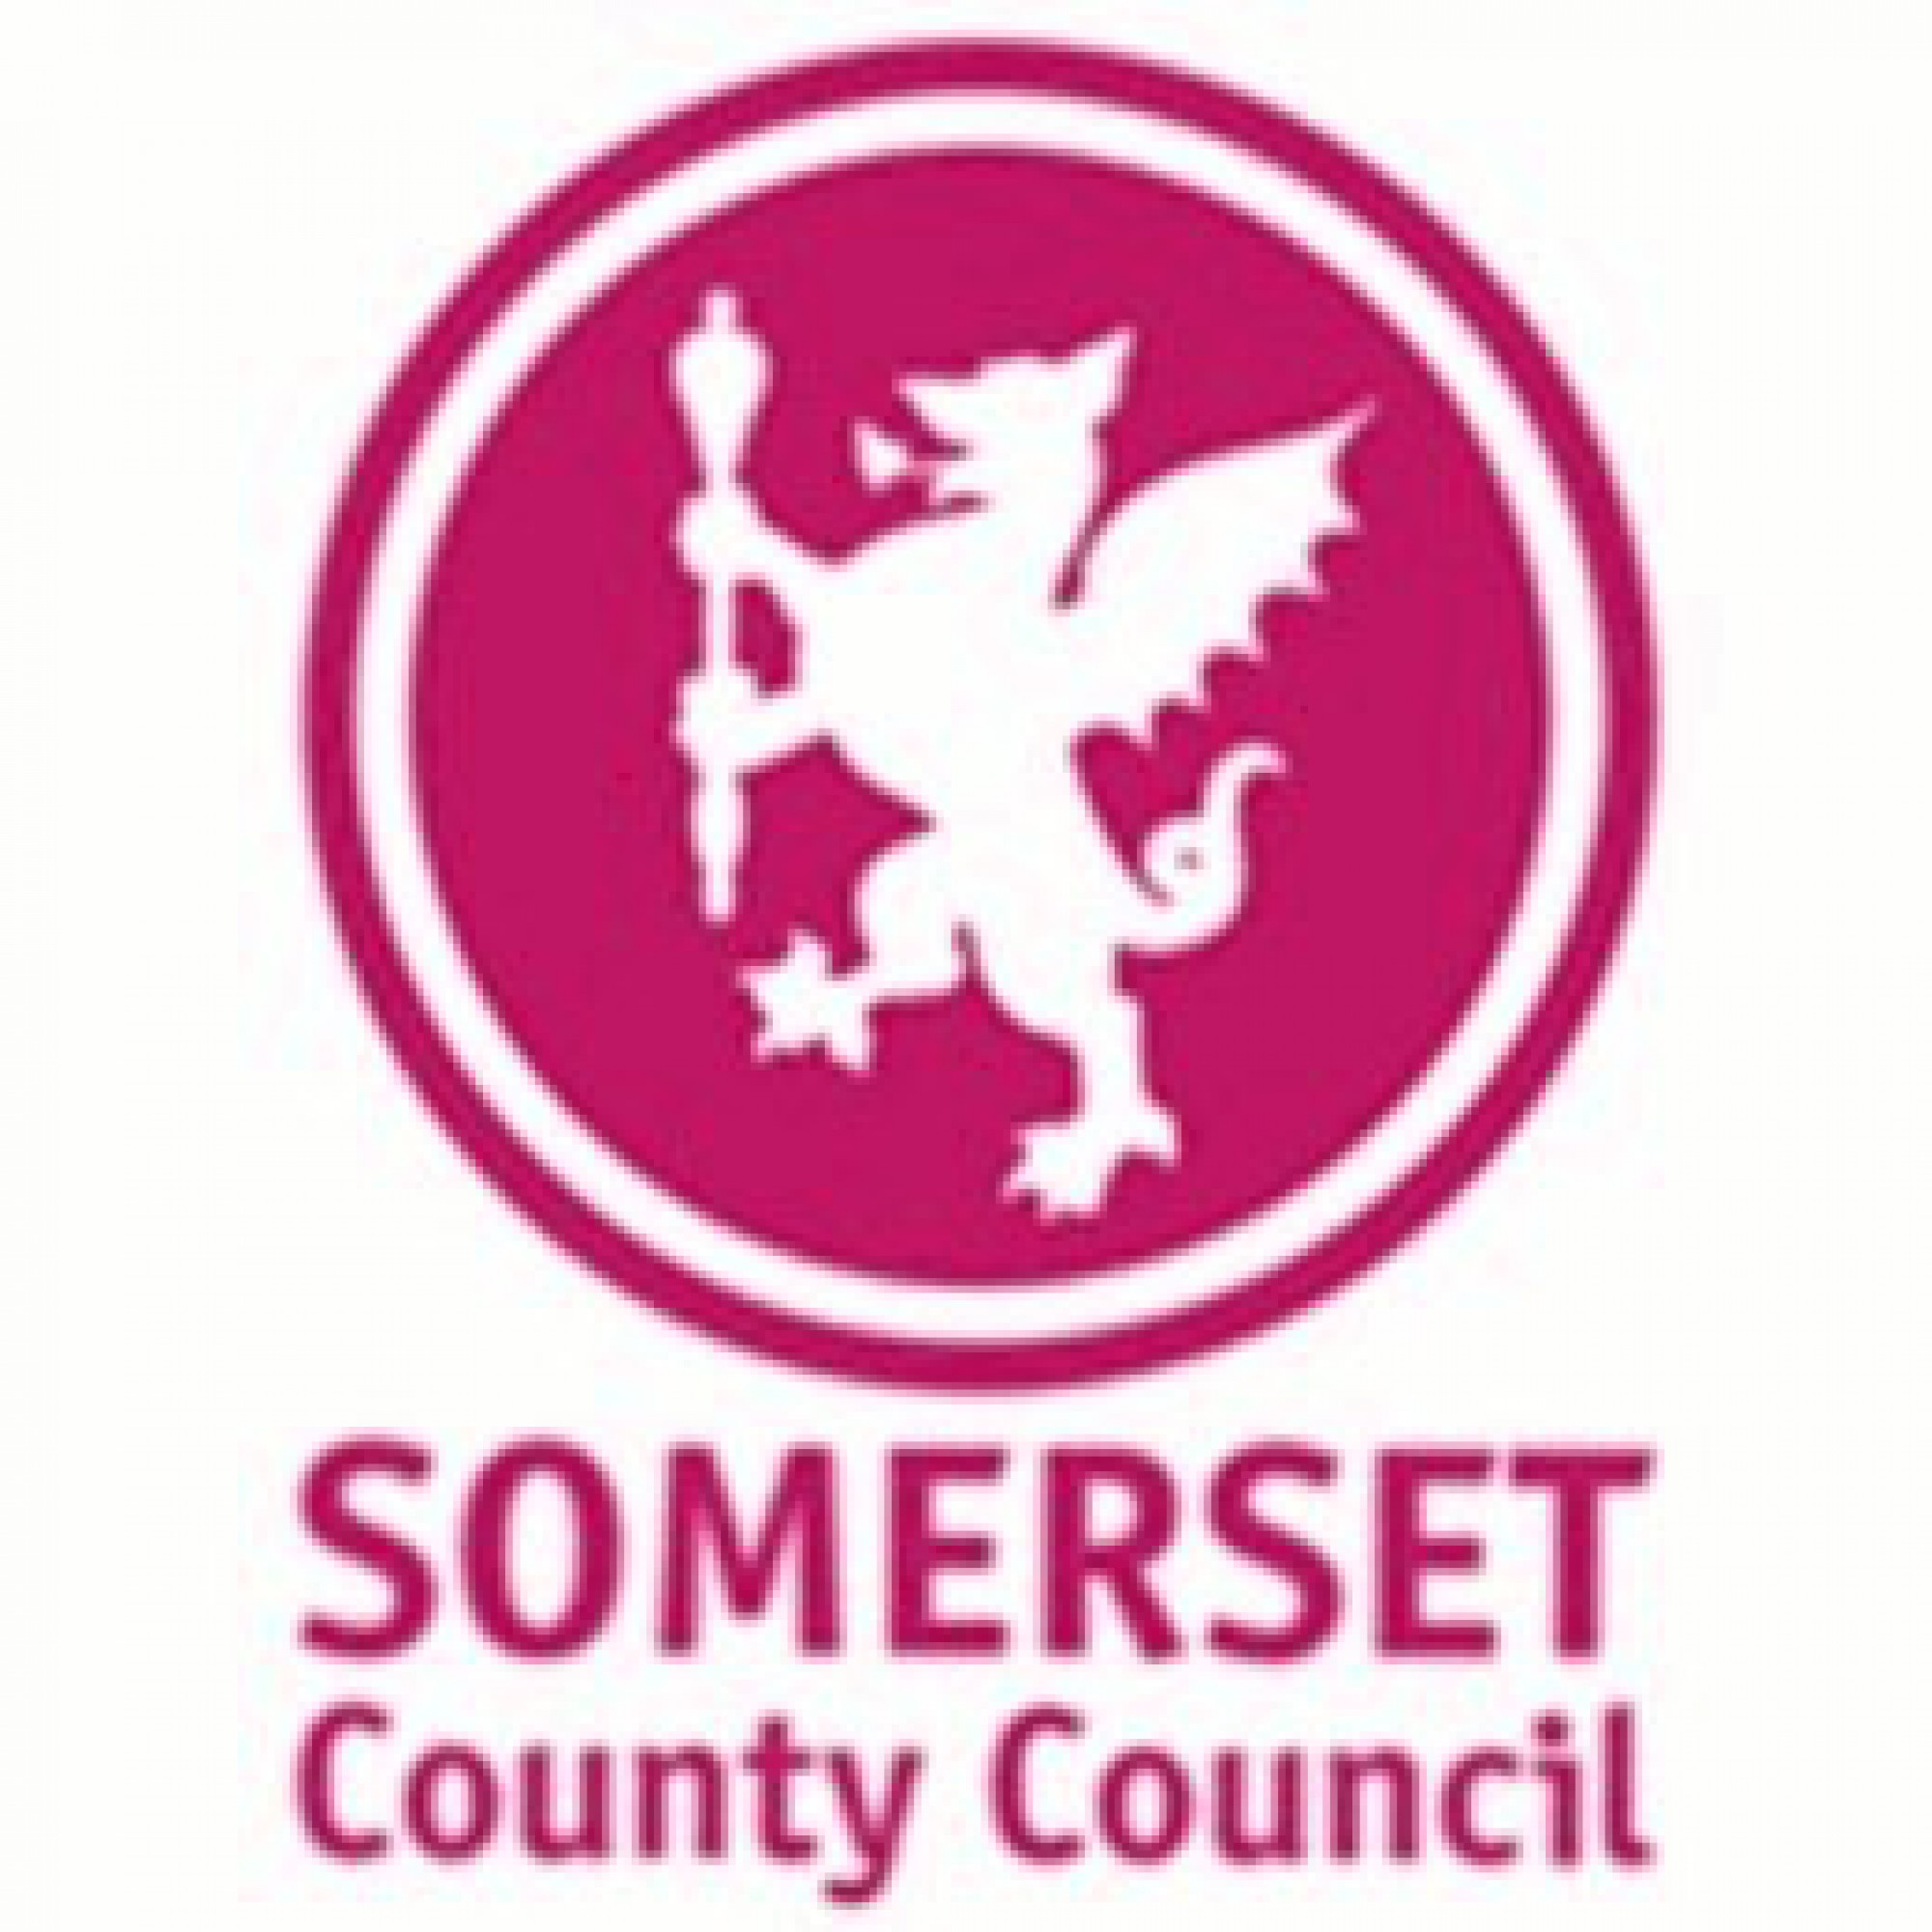 November 2021 Briefing sheet from David Fothergill, Leader of Somerset County Council